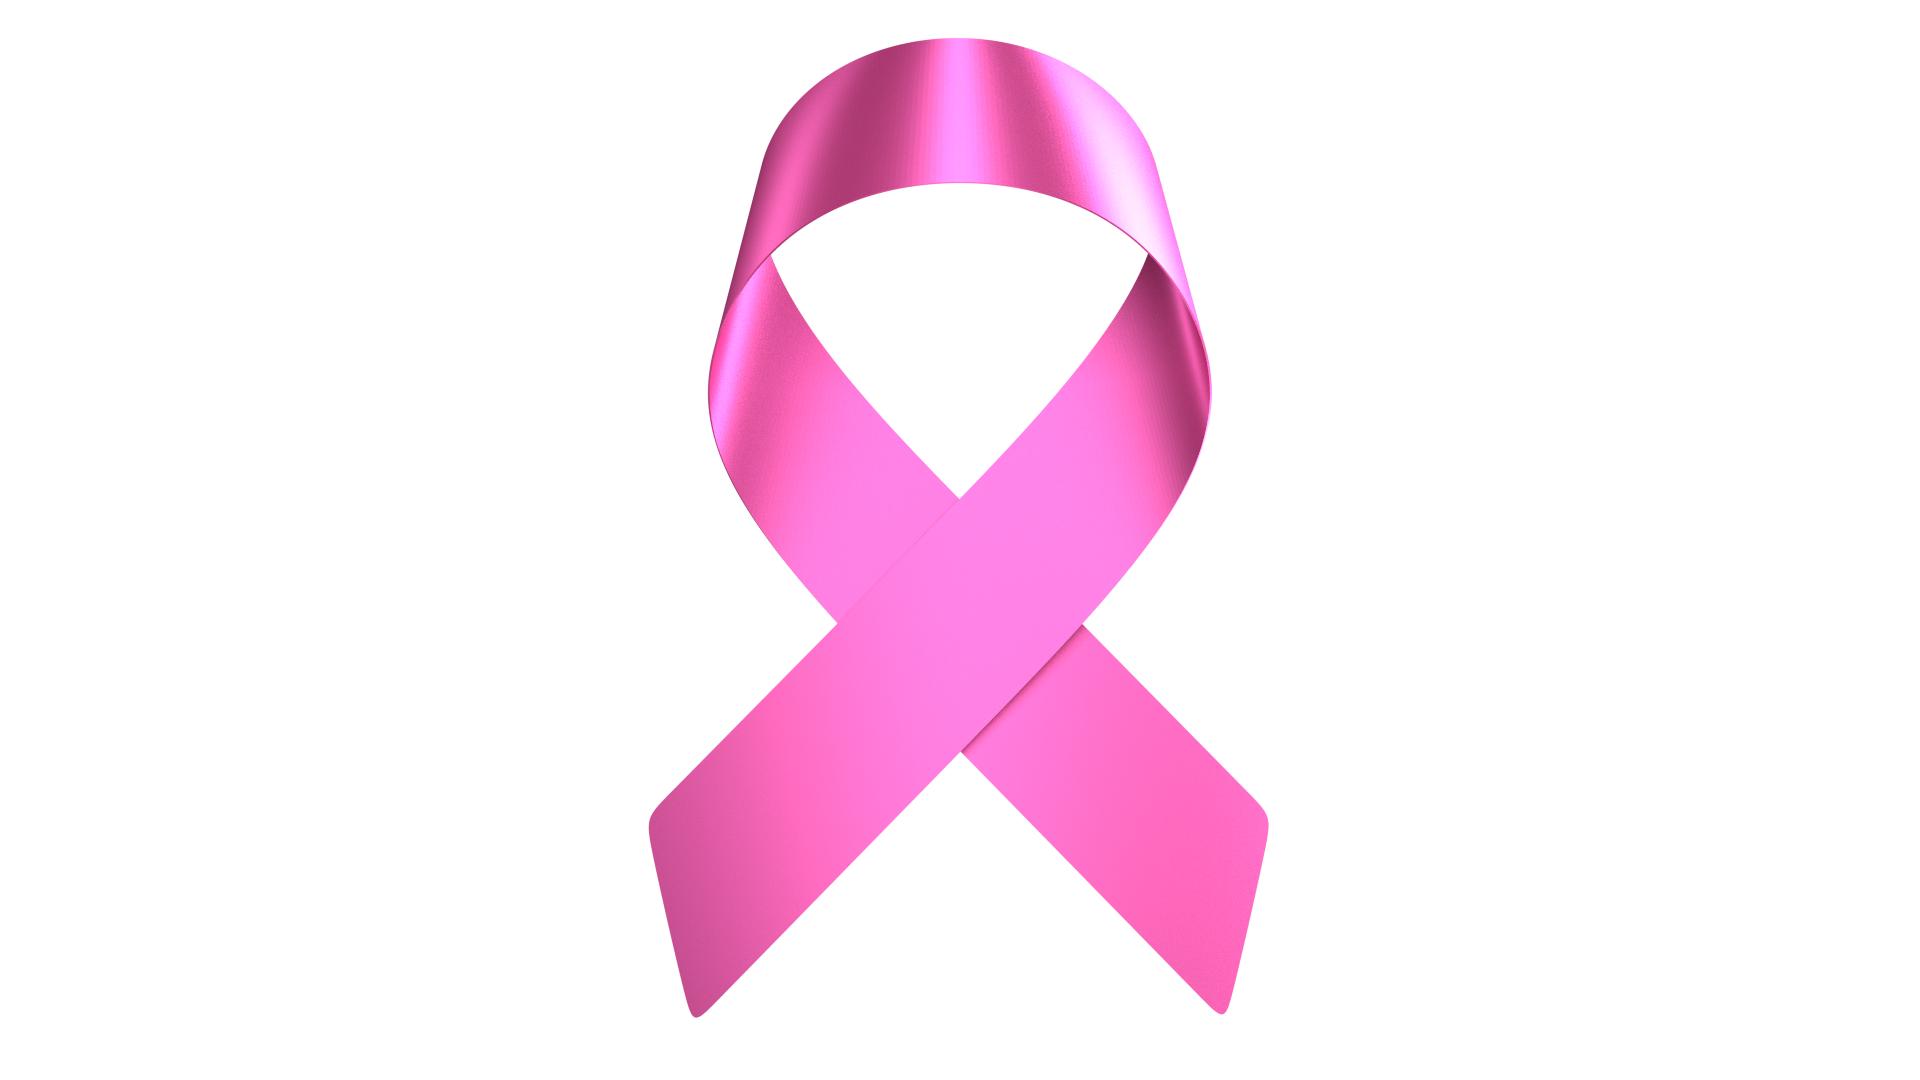 Royalty Free Cc Pink Ribbon Image For Breast Cancer Awareness Month - Cancer, Transparent background PNG HD thumbnail